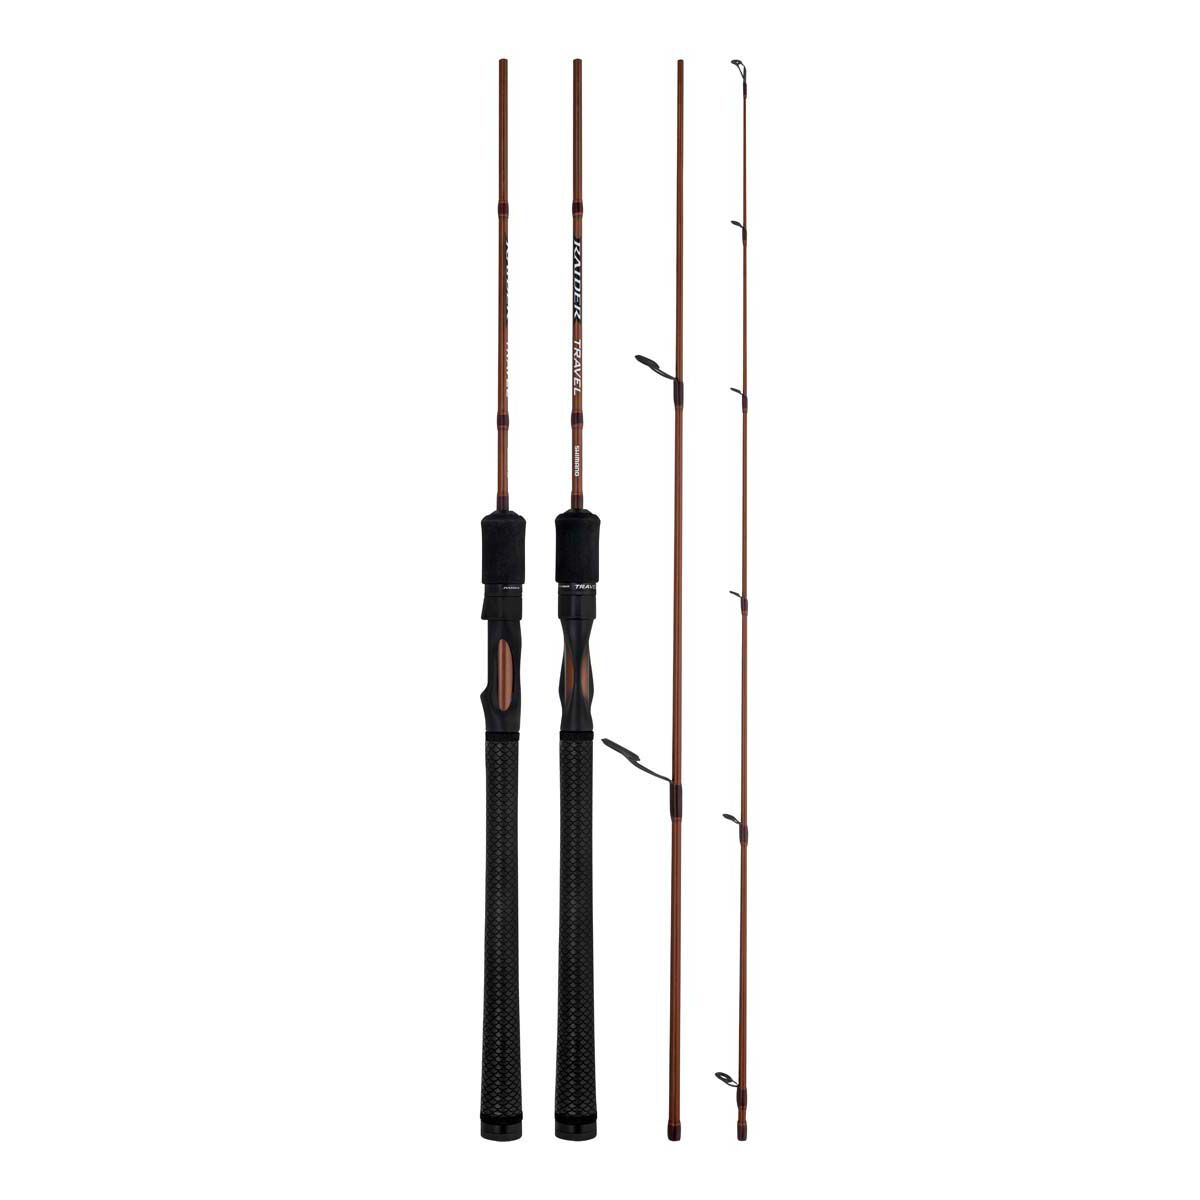 Shakespeare Saltwater Telescopic Fishing Rods & Poles for sale